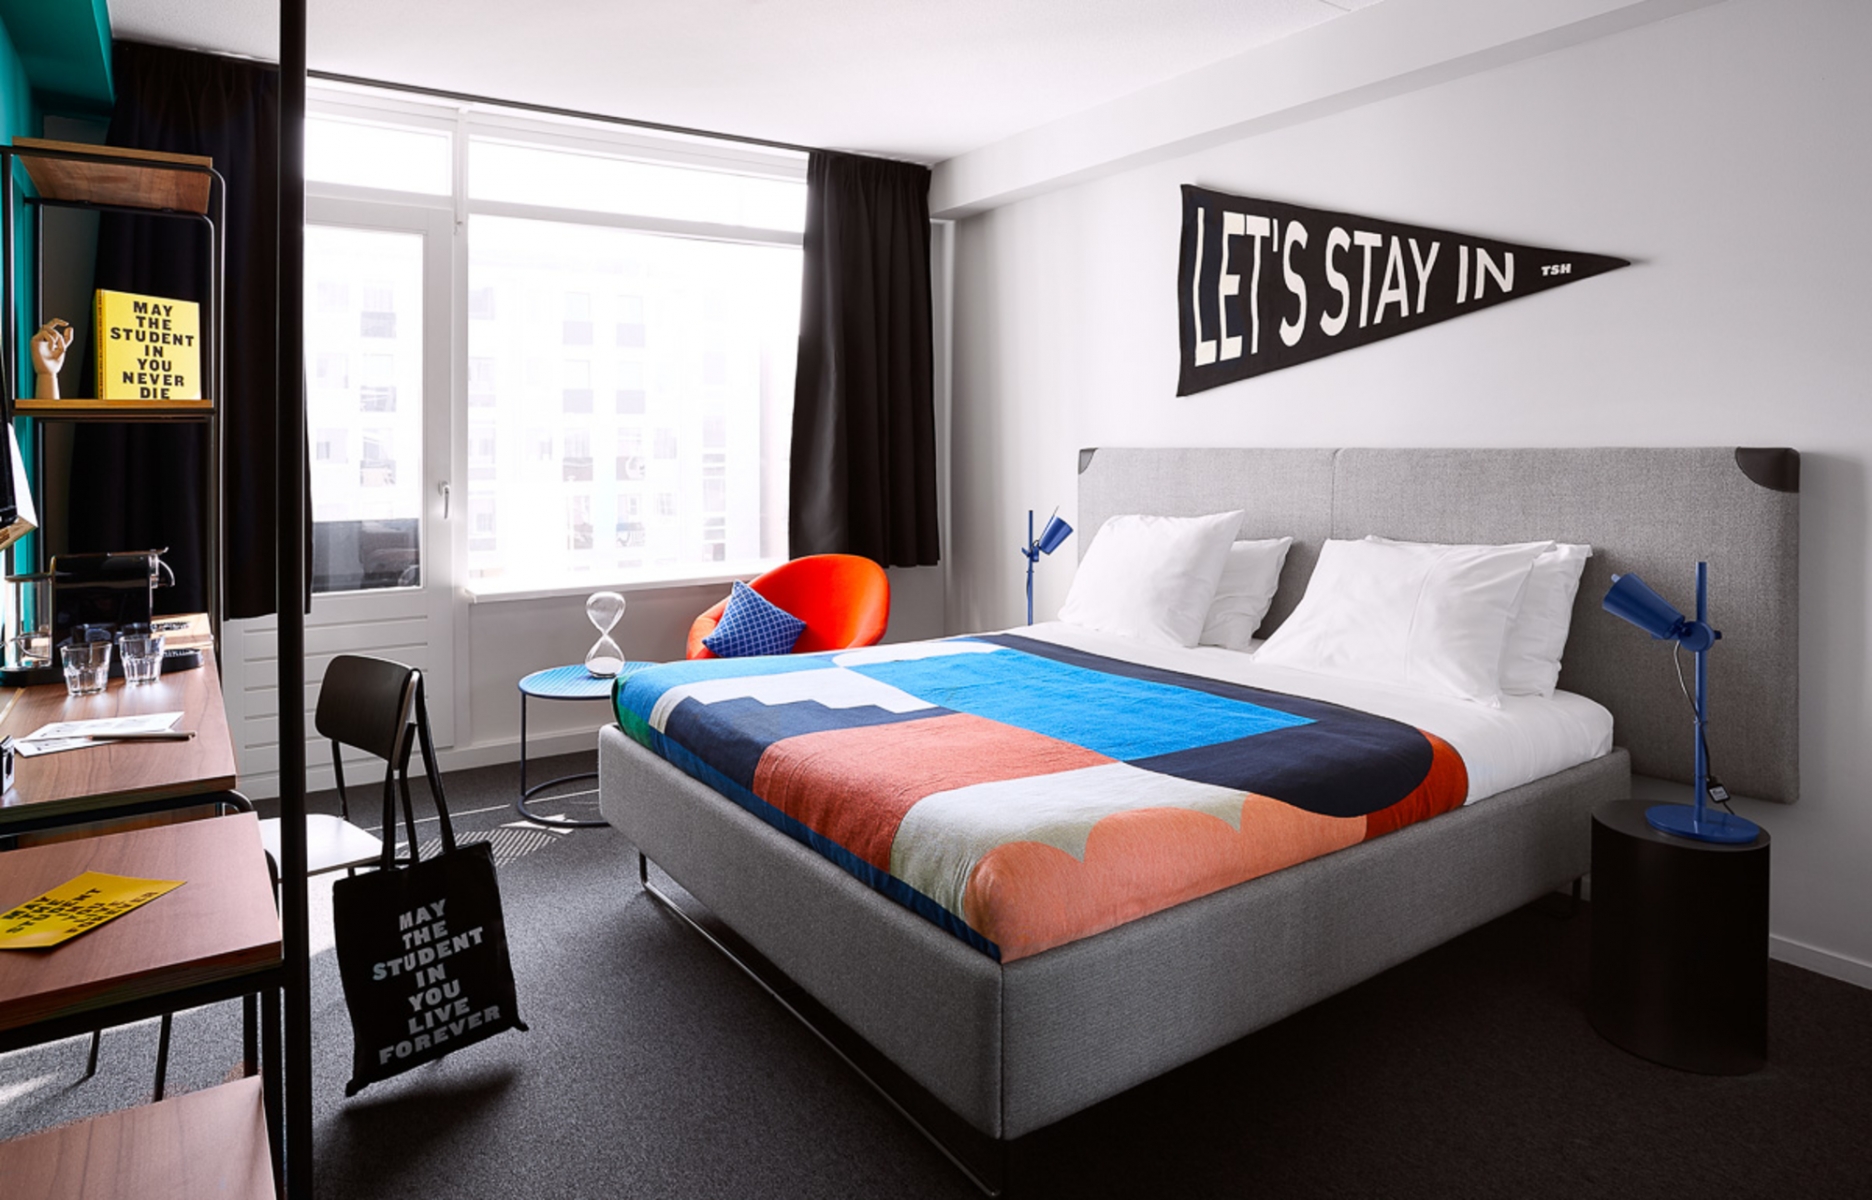 The Student Hotel The Hague <br/>60.30 ew <br/> <a href='http://vakantieoplossing.nl/outpage/?id=f1d6448973902a5a4c5d88ee7ffe6d91' target='_blank'>View Details</a>